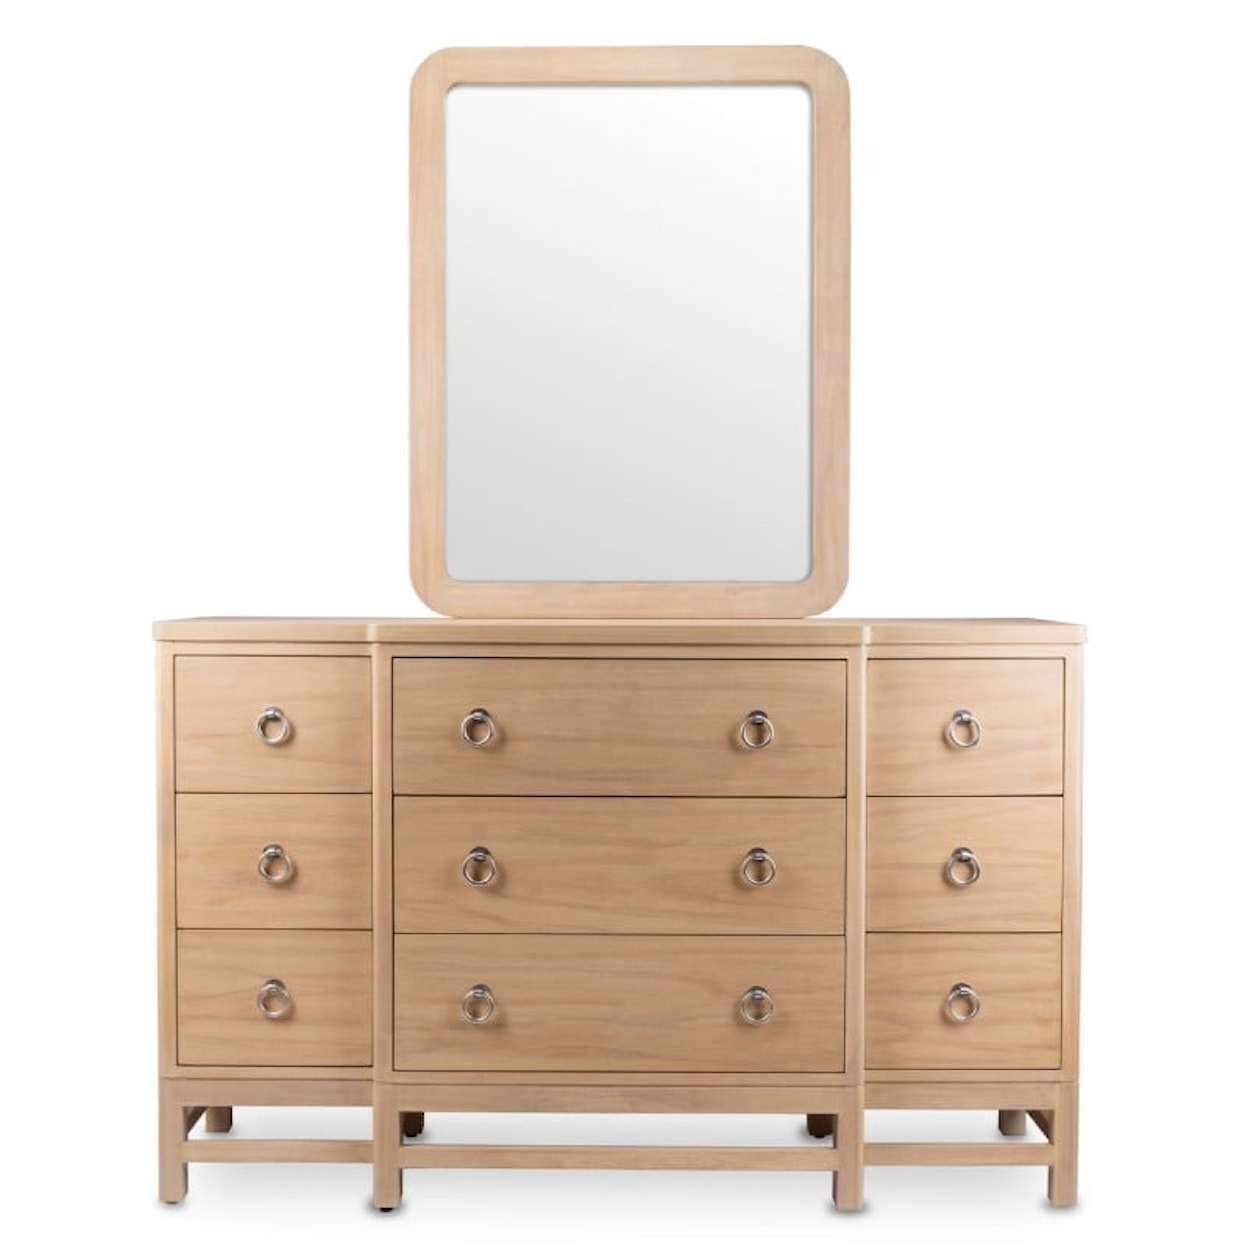 Sea Winds Trading Company Monterey Dresser and Mirror